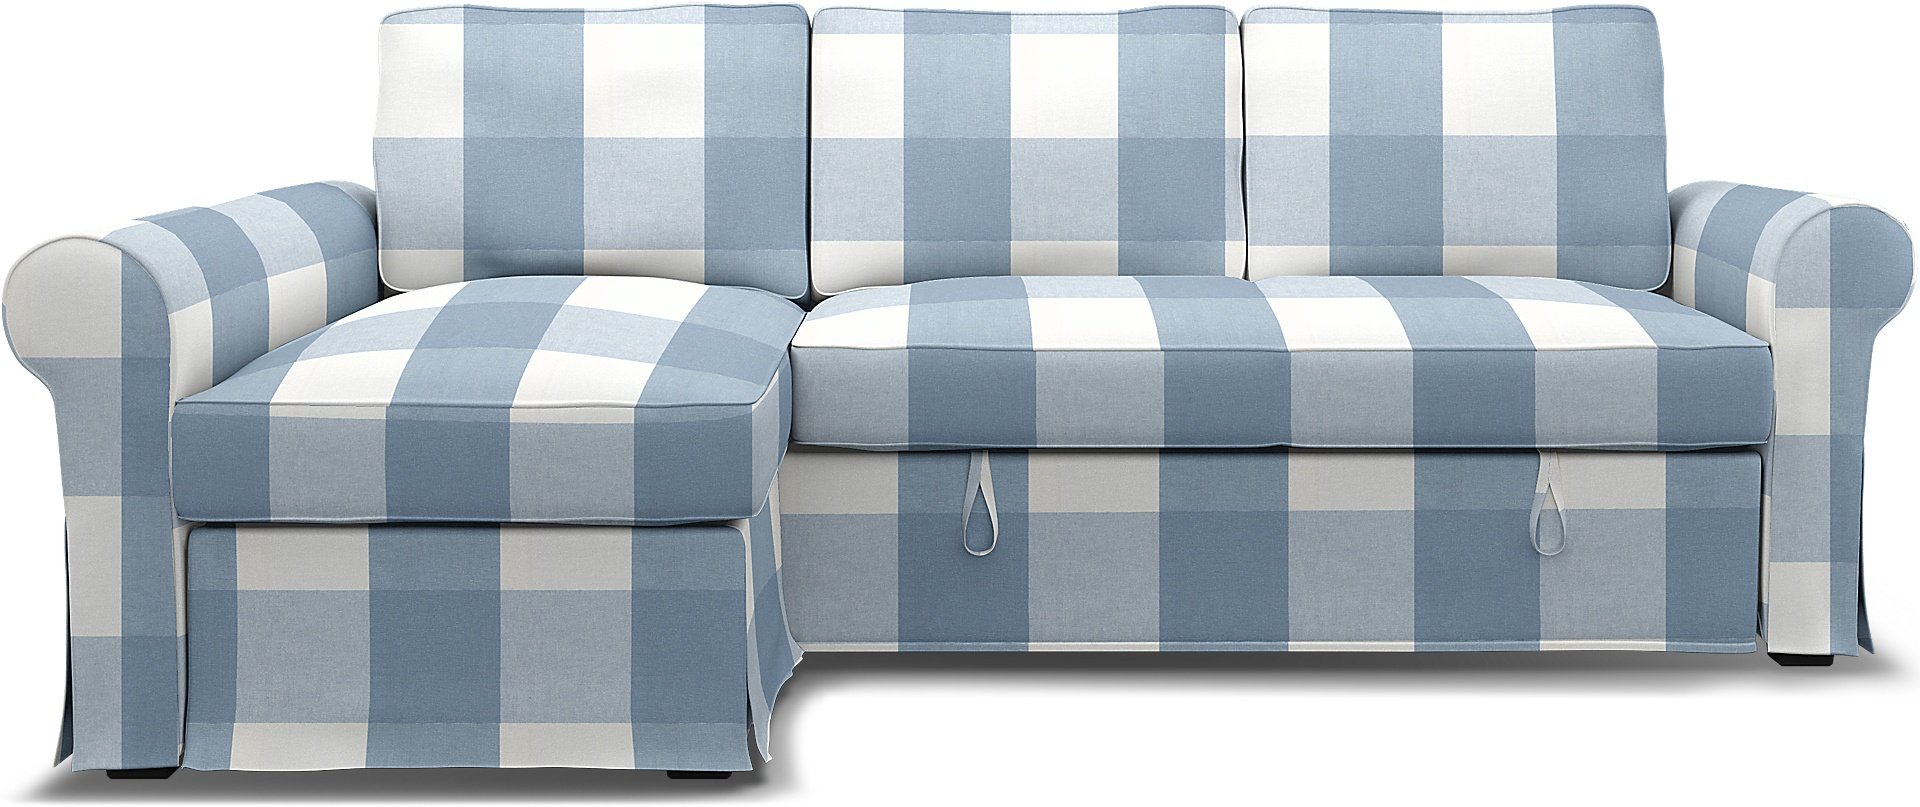 IKEA - Backabro Sofabed with Chaise Cover, Sky Blue, Linen - Bemz